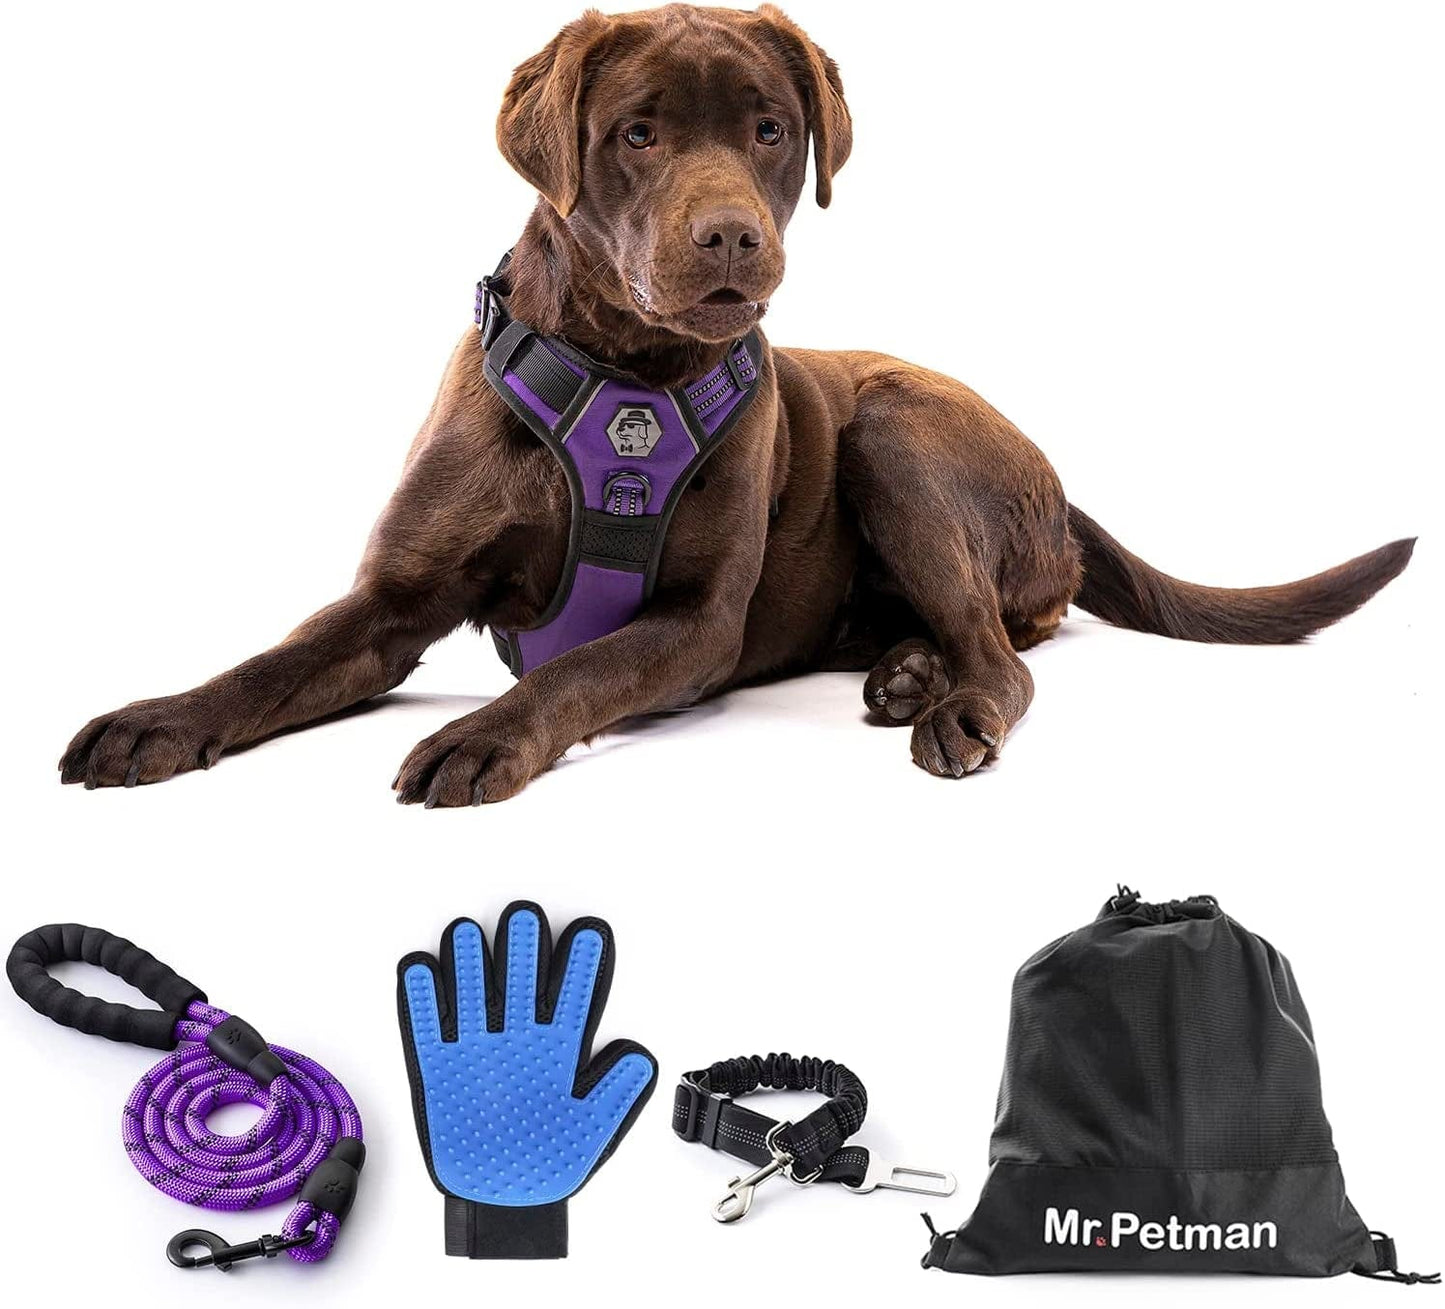 MR. PETMAN No Pull Dog Harness with Leash, Seat Belt, Grooming Glove - No Choke Dog Harness Set for Small Medium Large Dogs- Reflective Adjustable Dog Vest Harnesses with Handle for Walking Training Animals & Pet Supplies > Pet Supplies > Dog Supplies > Dog Apparel Mr. Petman Modern Purple Large 